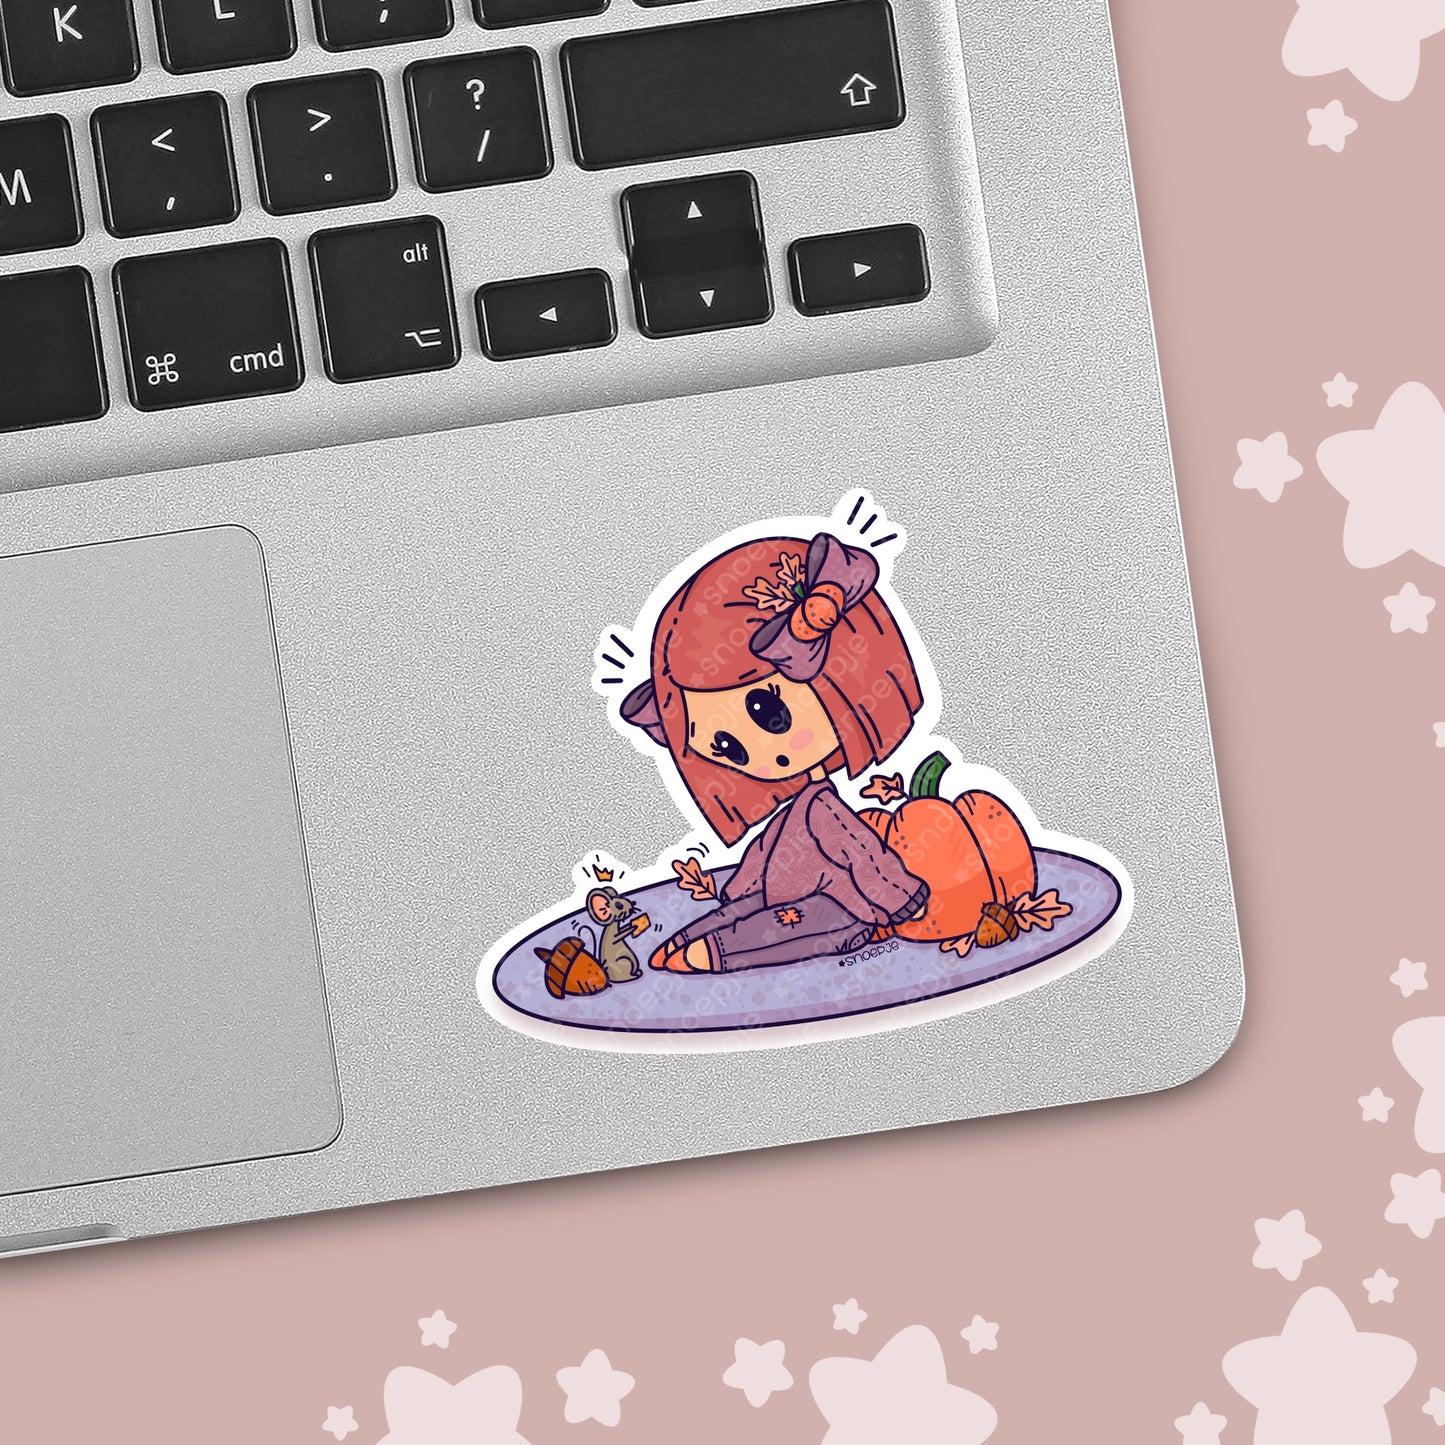 Kawaii Girl with Mouse Sticker